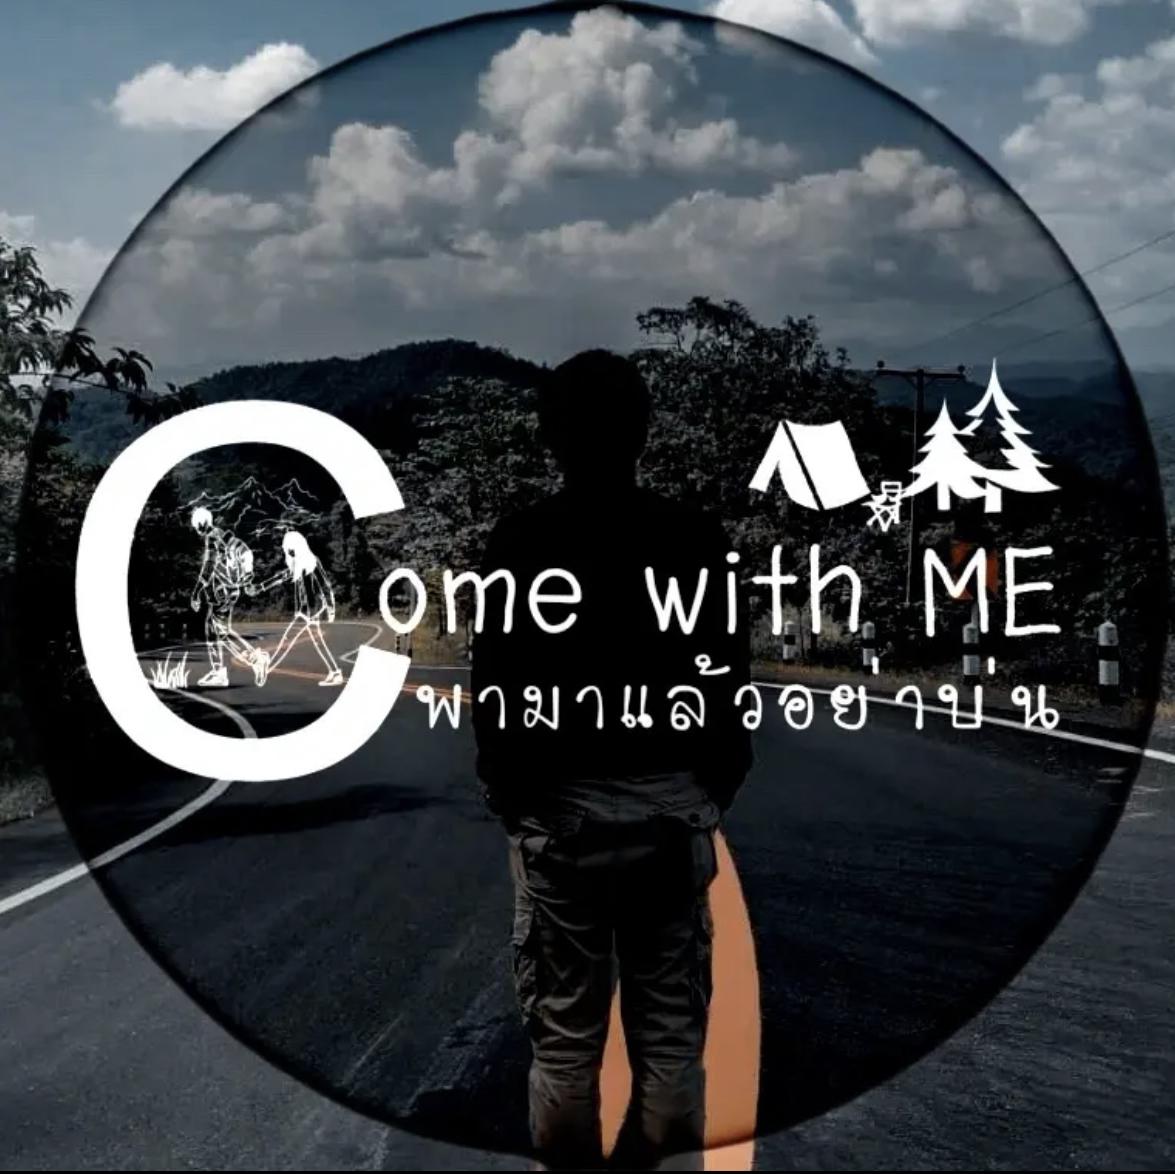 Comewithme